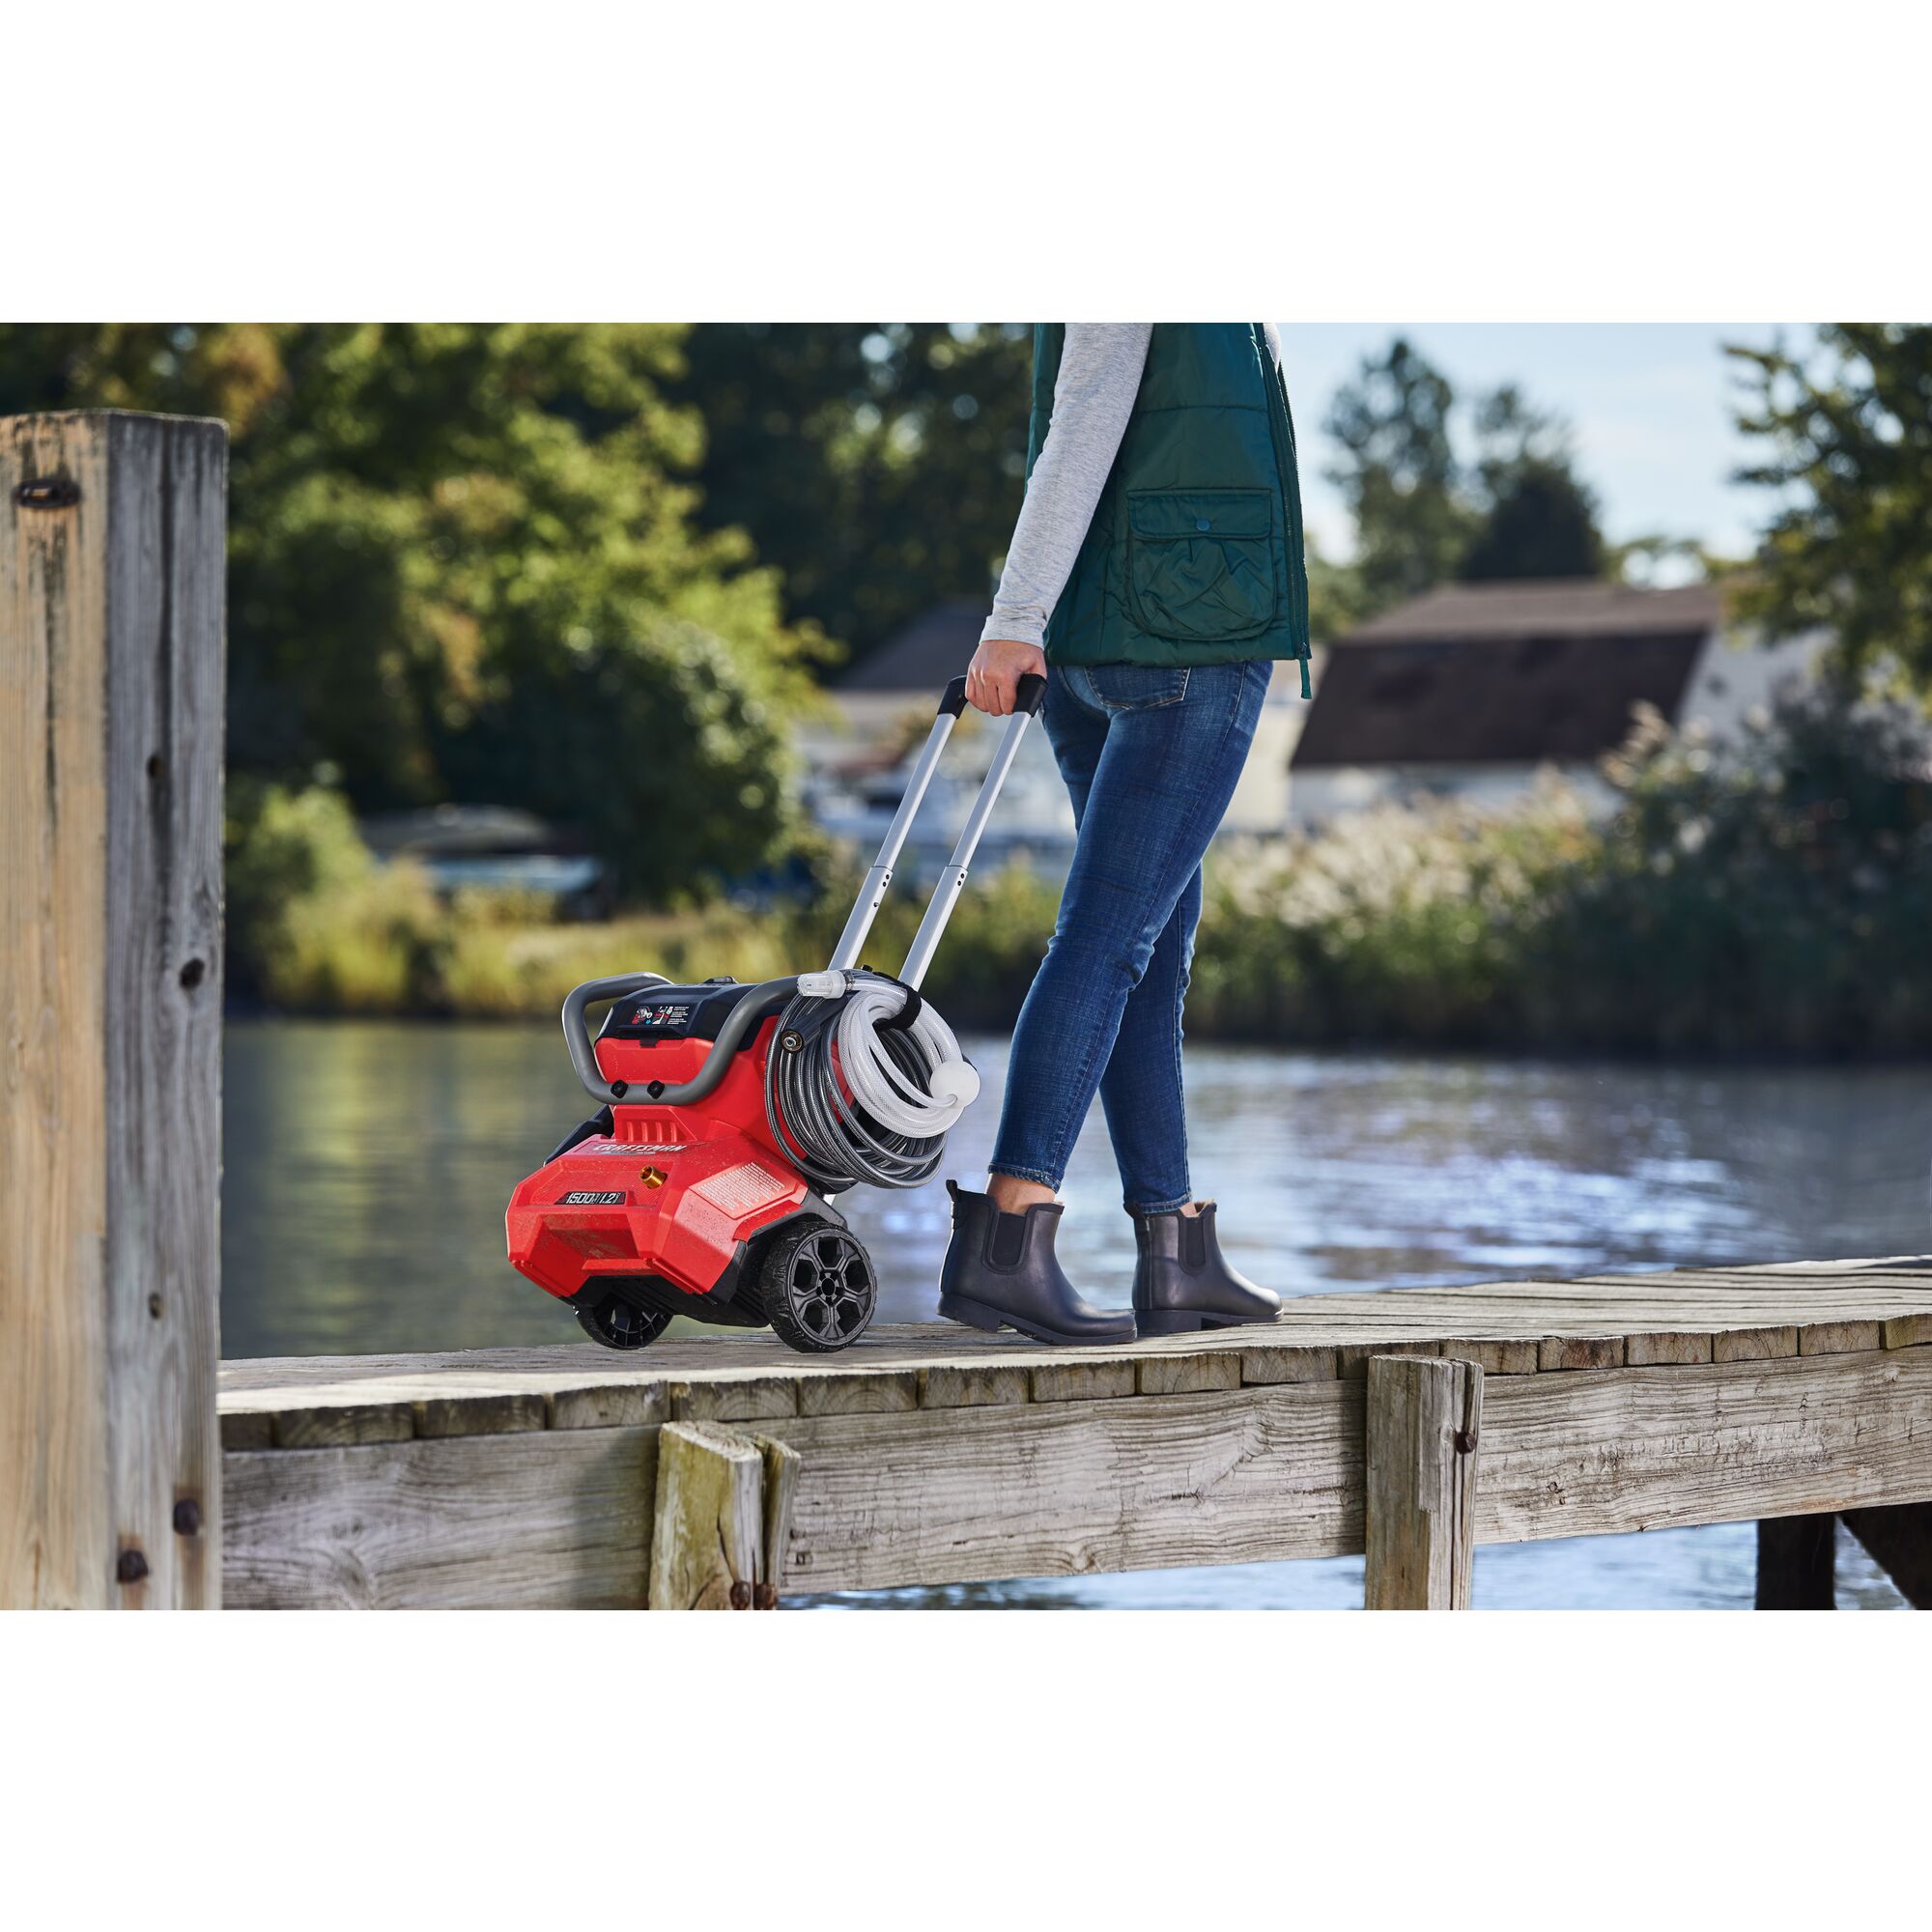 CRAFTSMAN 1500 PSI Pressure Washer being wheeled on pier by female